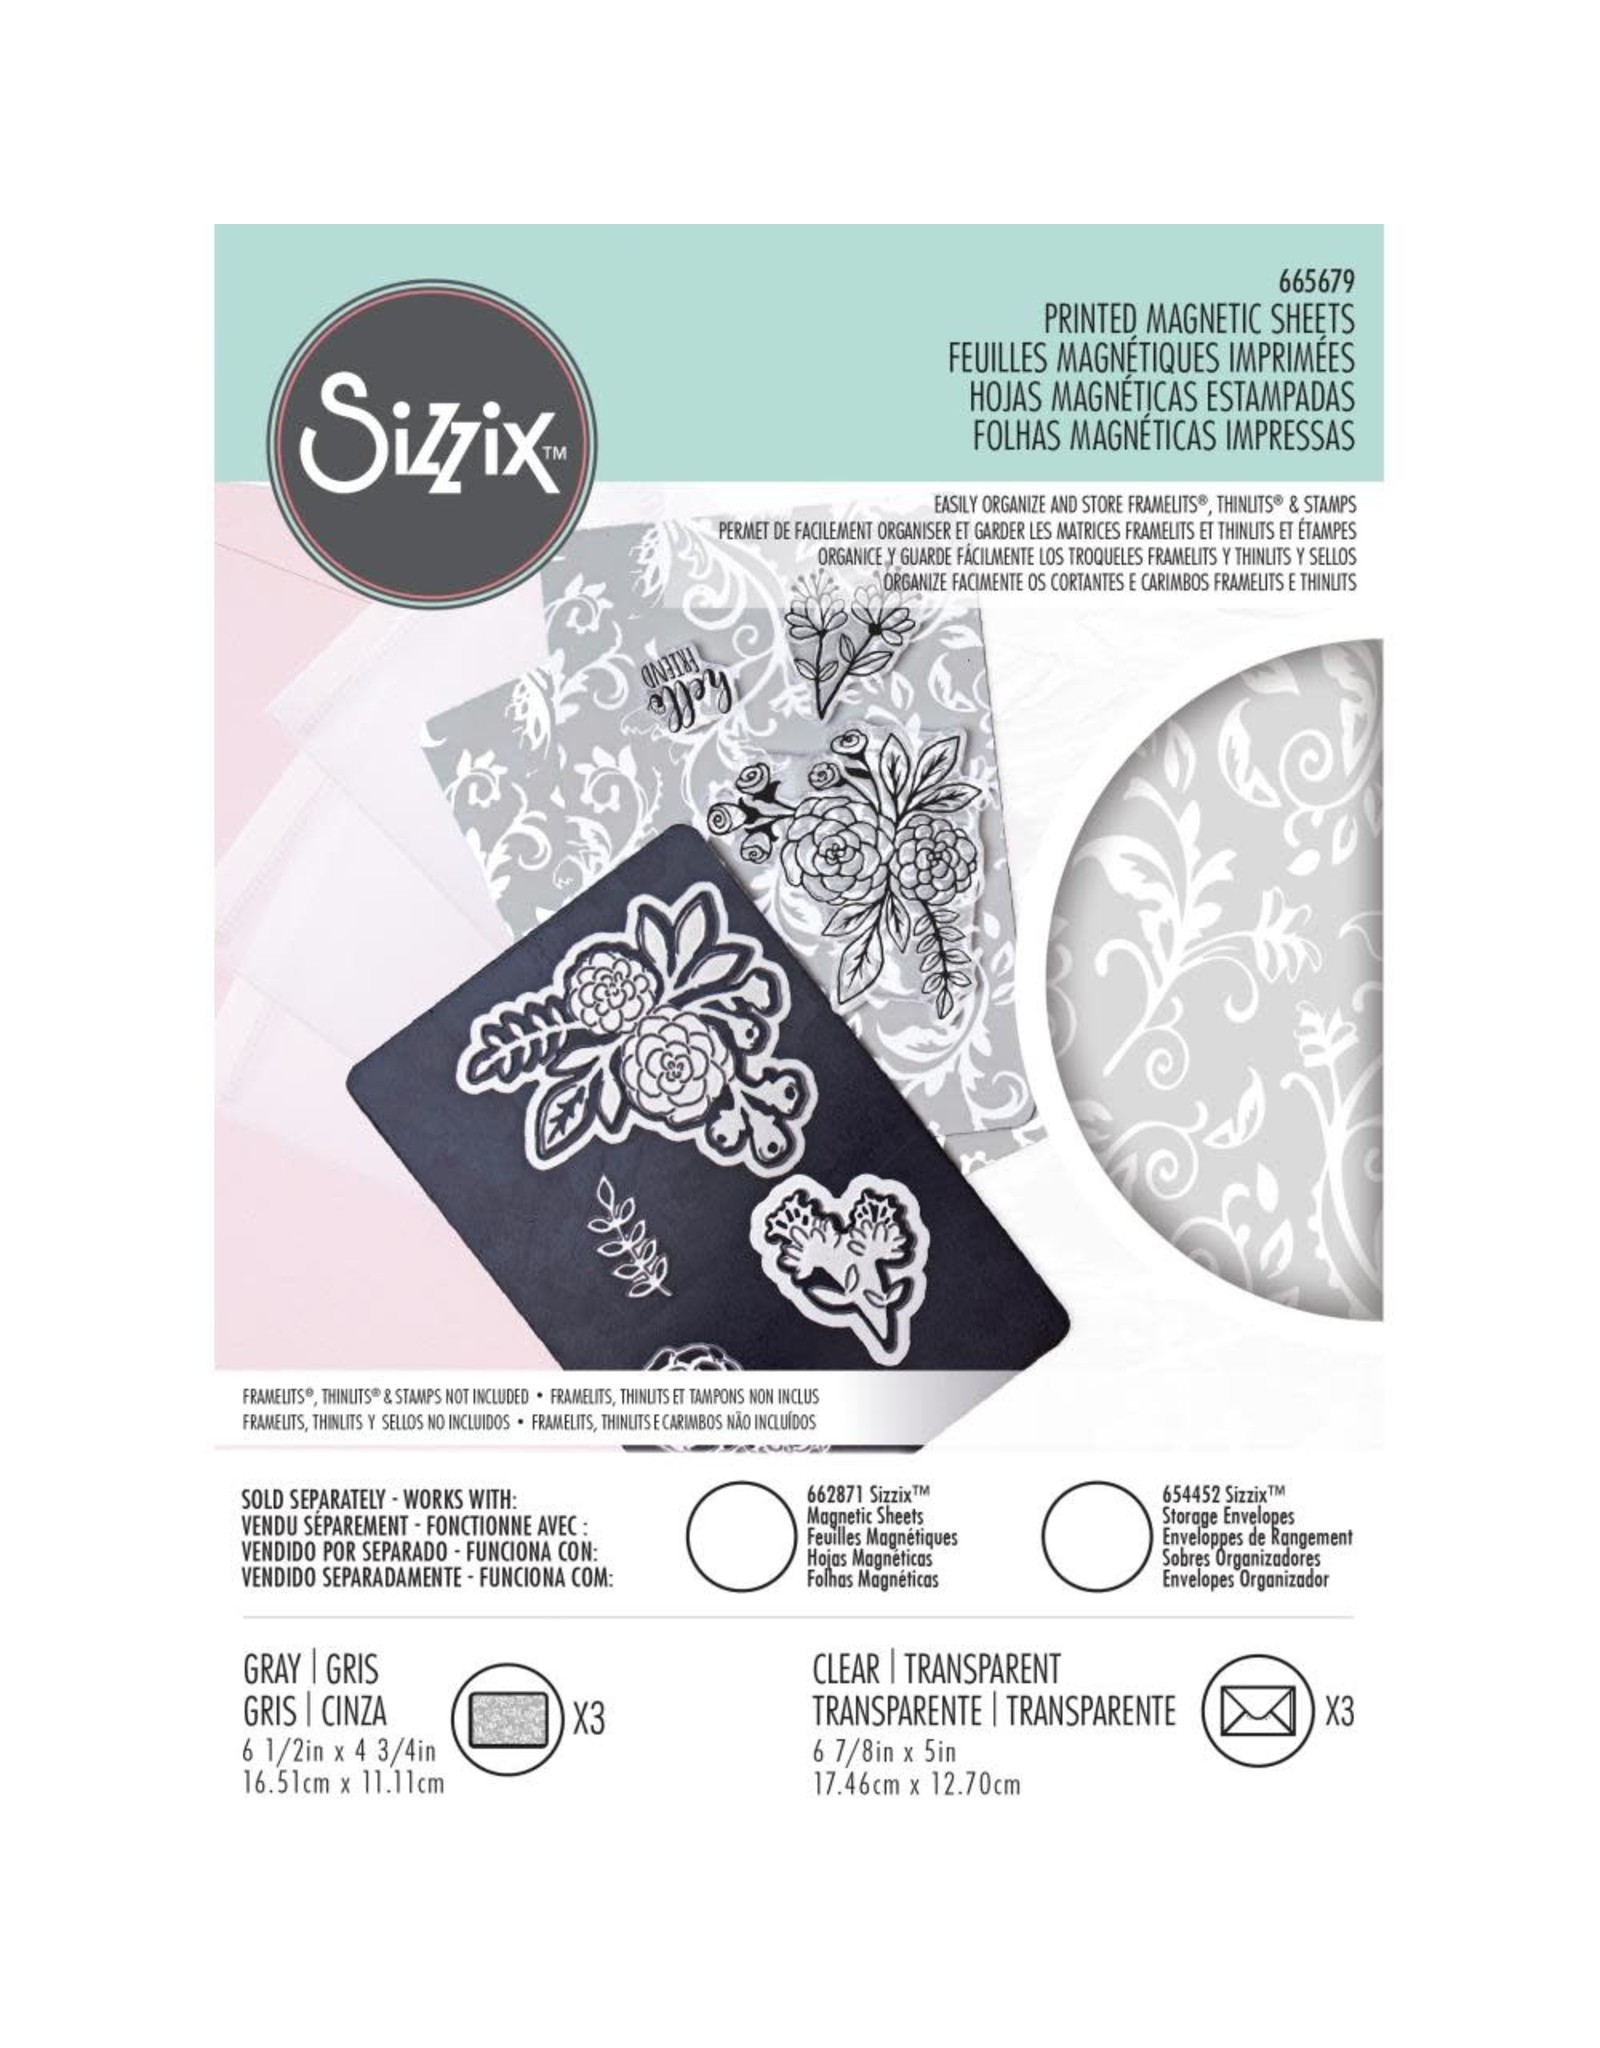 SIZZIX SIZZIX PRINTED MAGNETIC SHEETS WITH ENVELOPES 4.375x6.5  3/PK